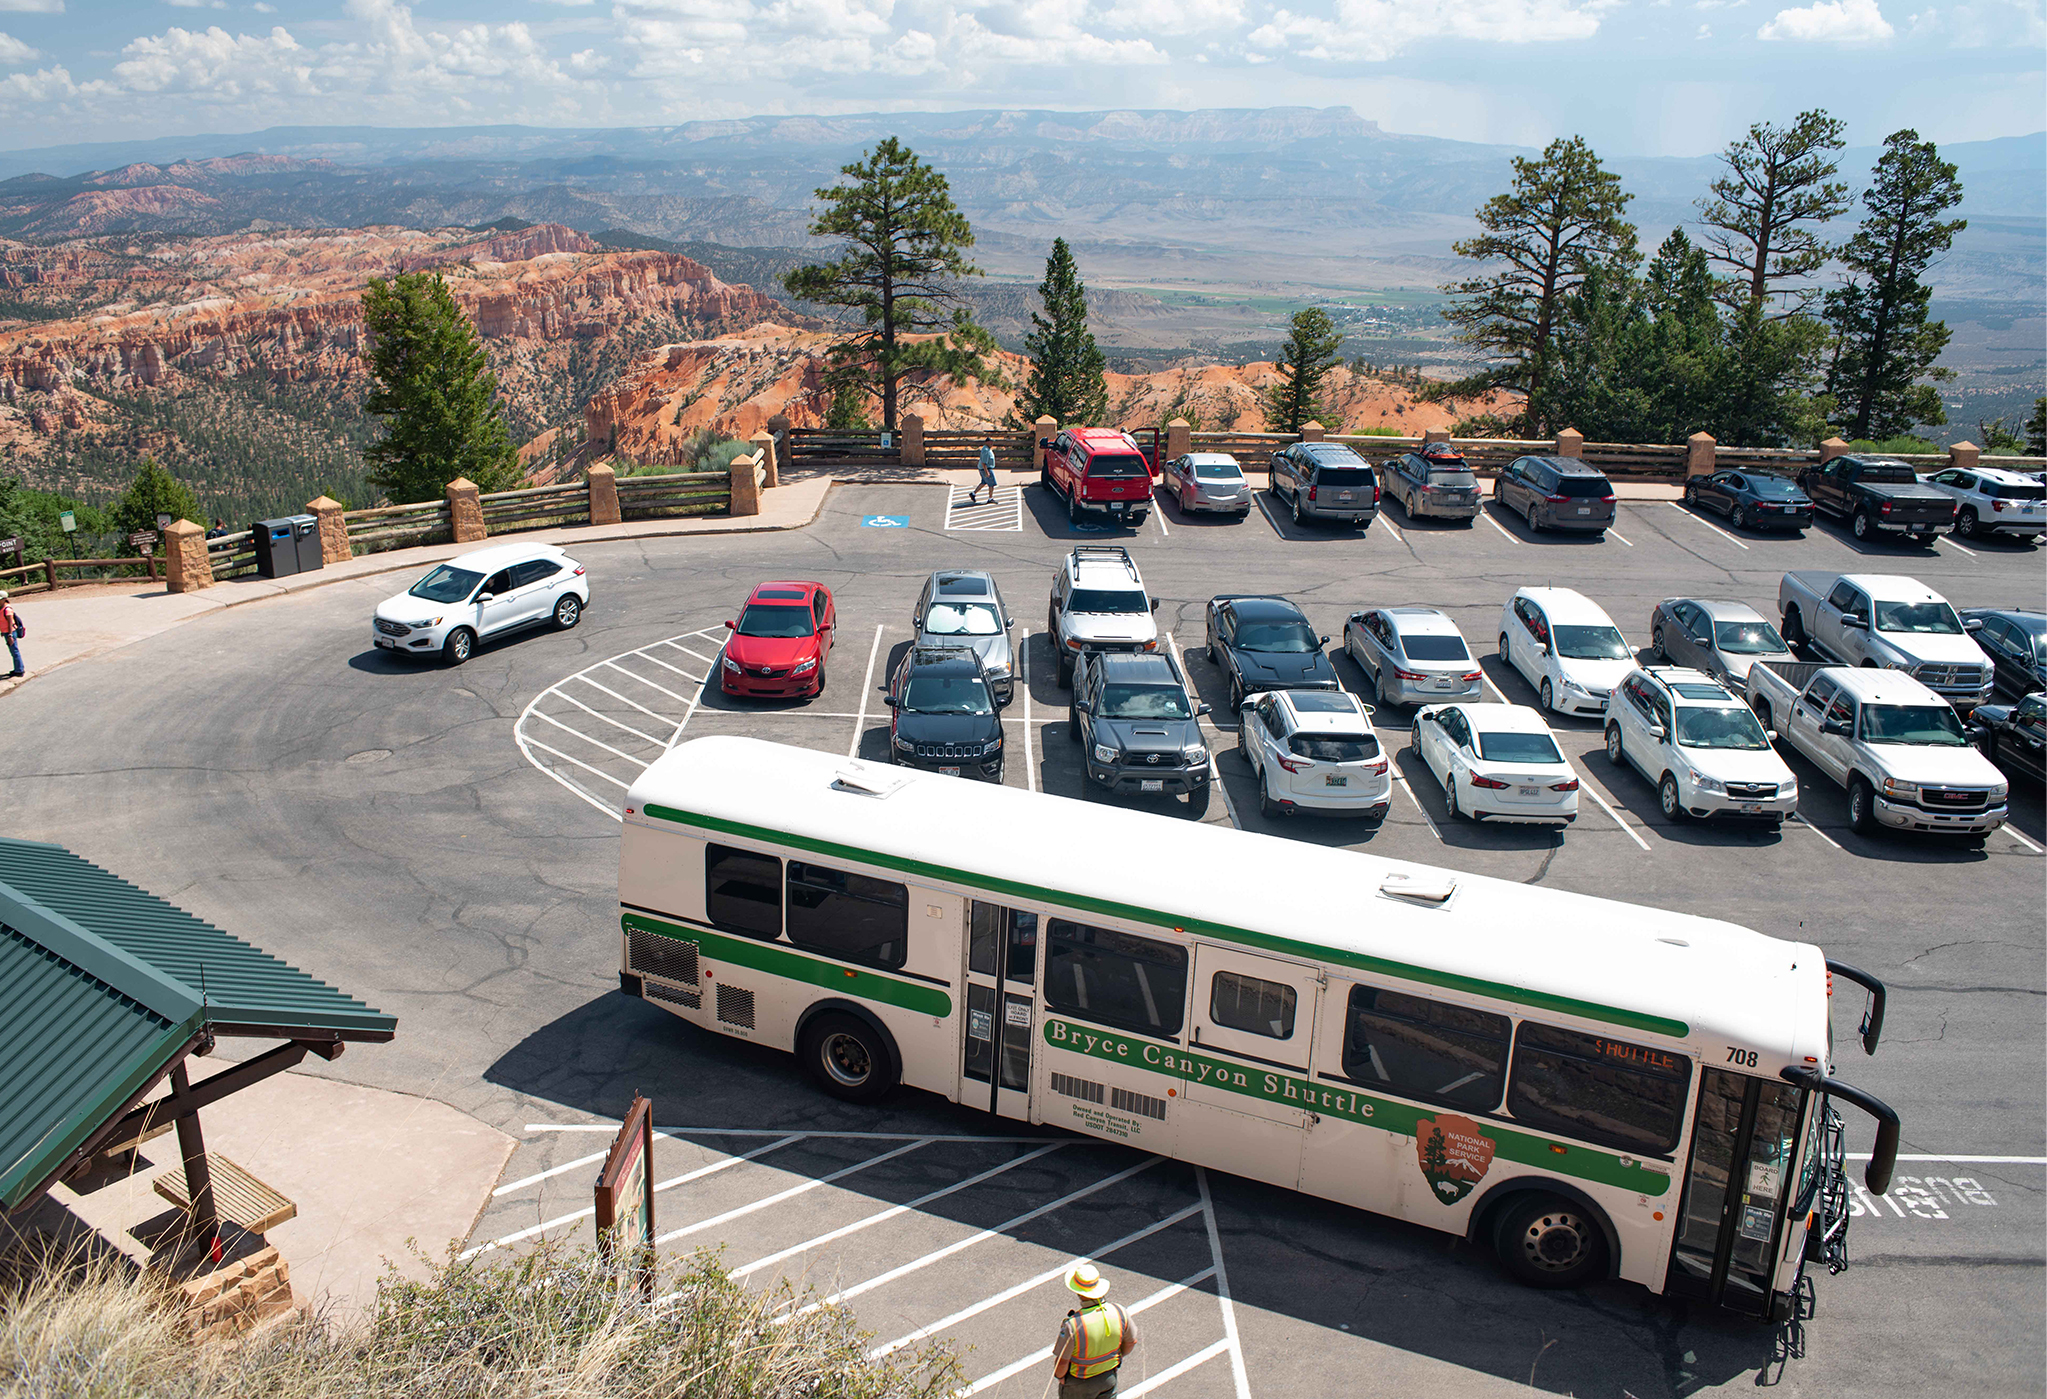 A white and green shuttle bus drives through a busy parking lot in a forested, red rock landscape.